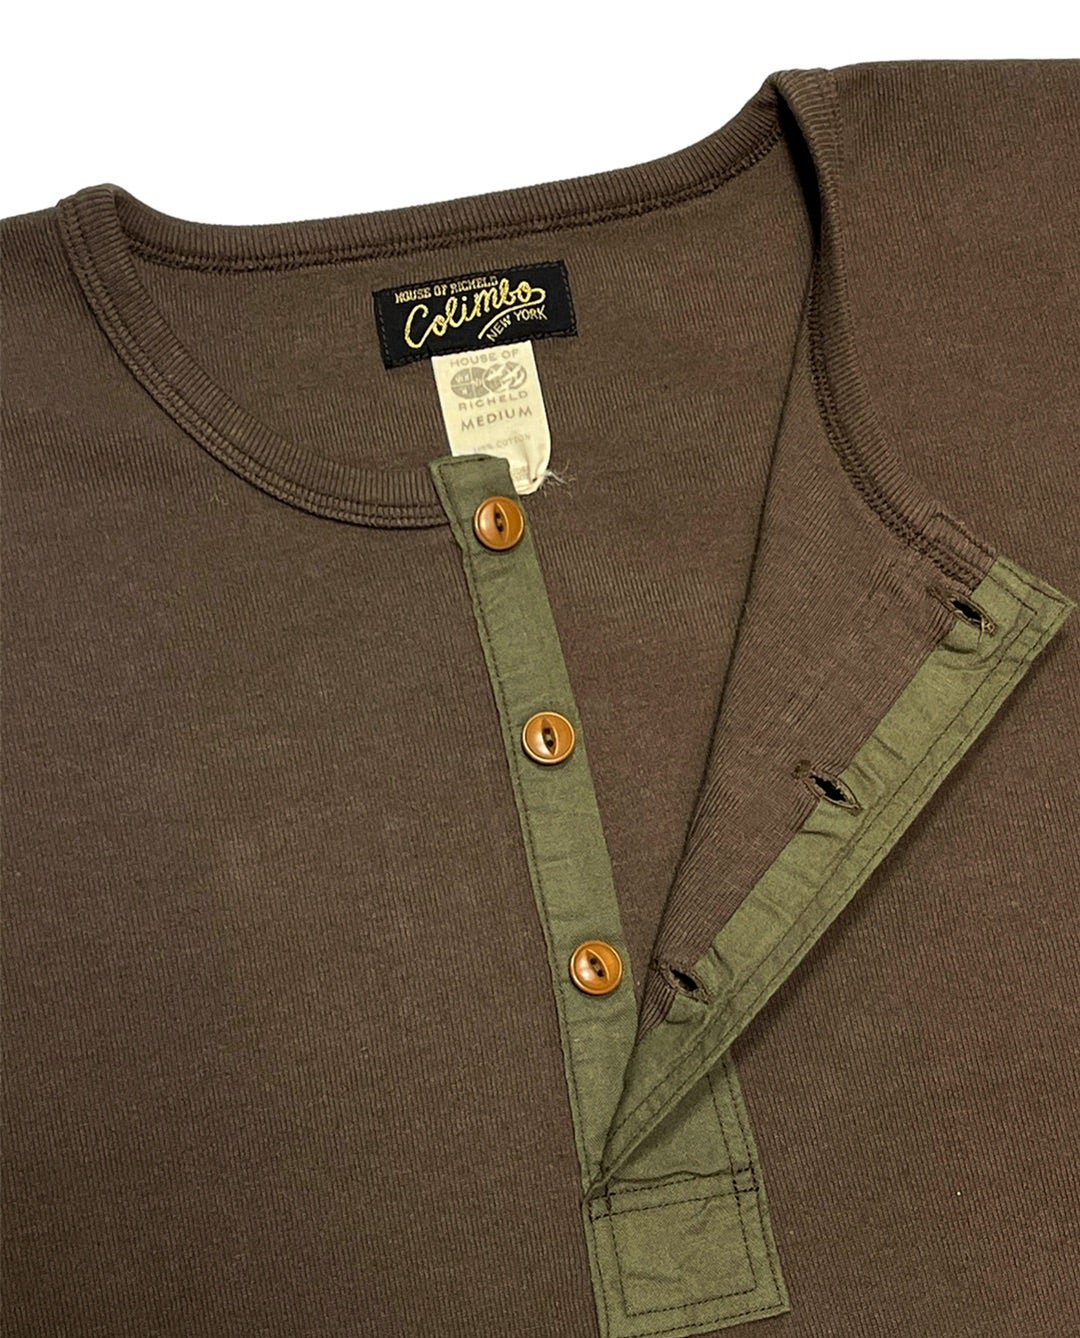 COLIMBO(コリンボ) Thirty-Miles Henry Neck Tee L/S -Fine Cotton Rib Stitched  Body- Olive【ZX-0431】| Fresno(フレズノ)公式通販サイト